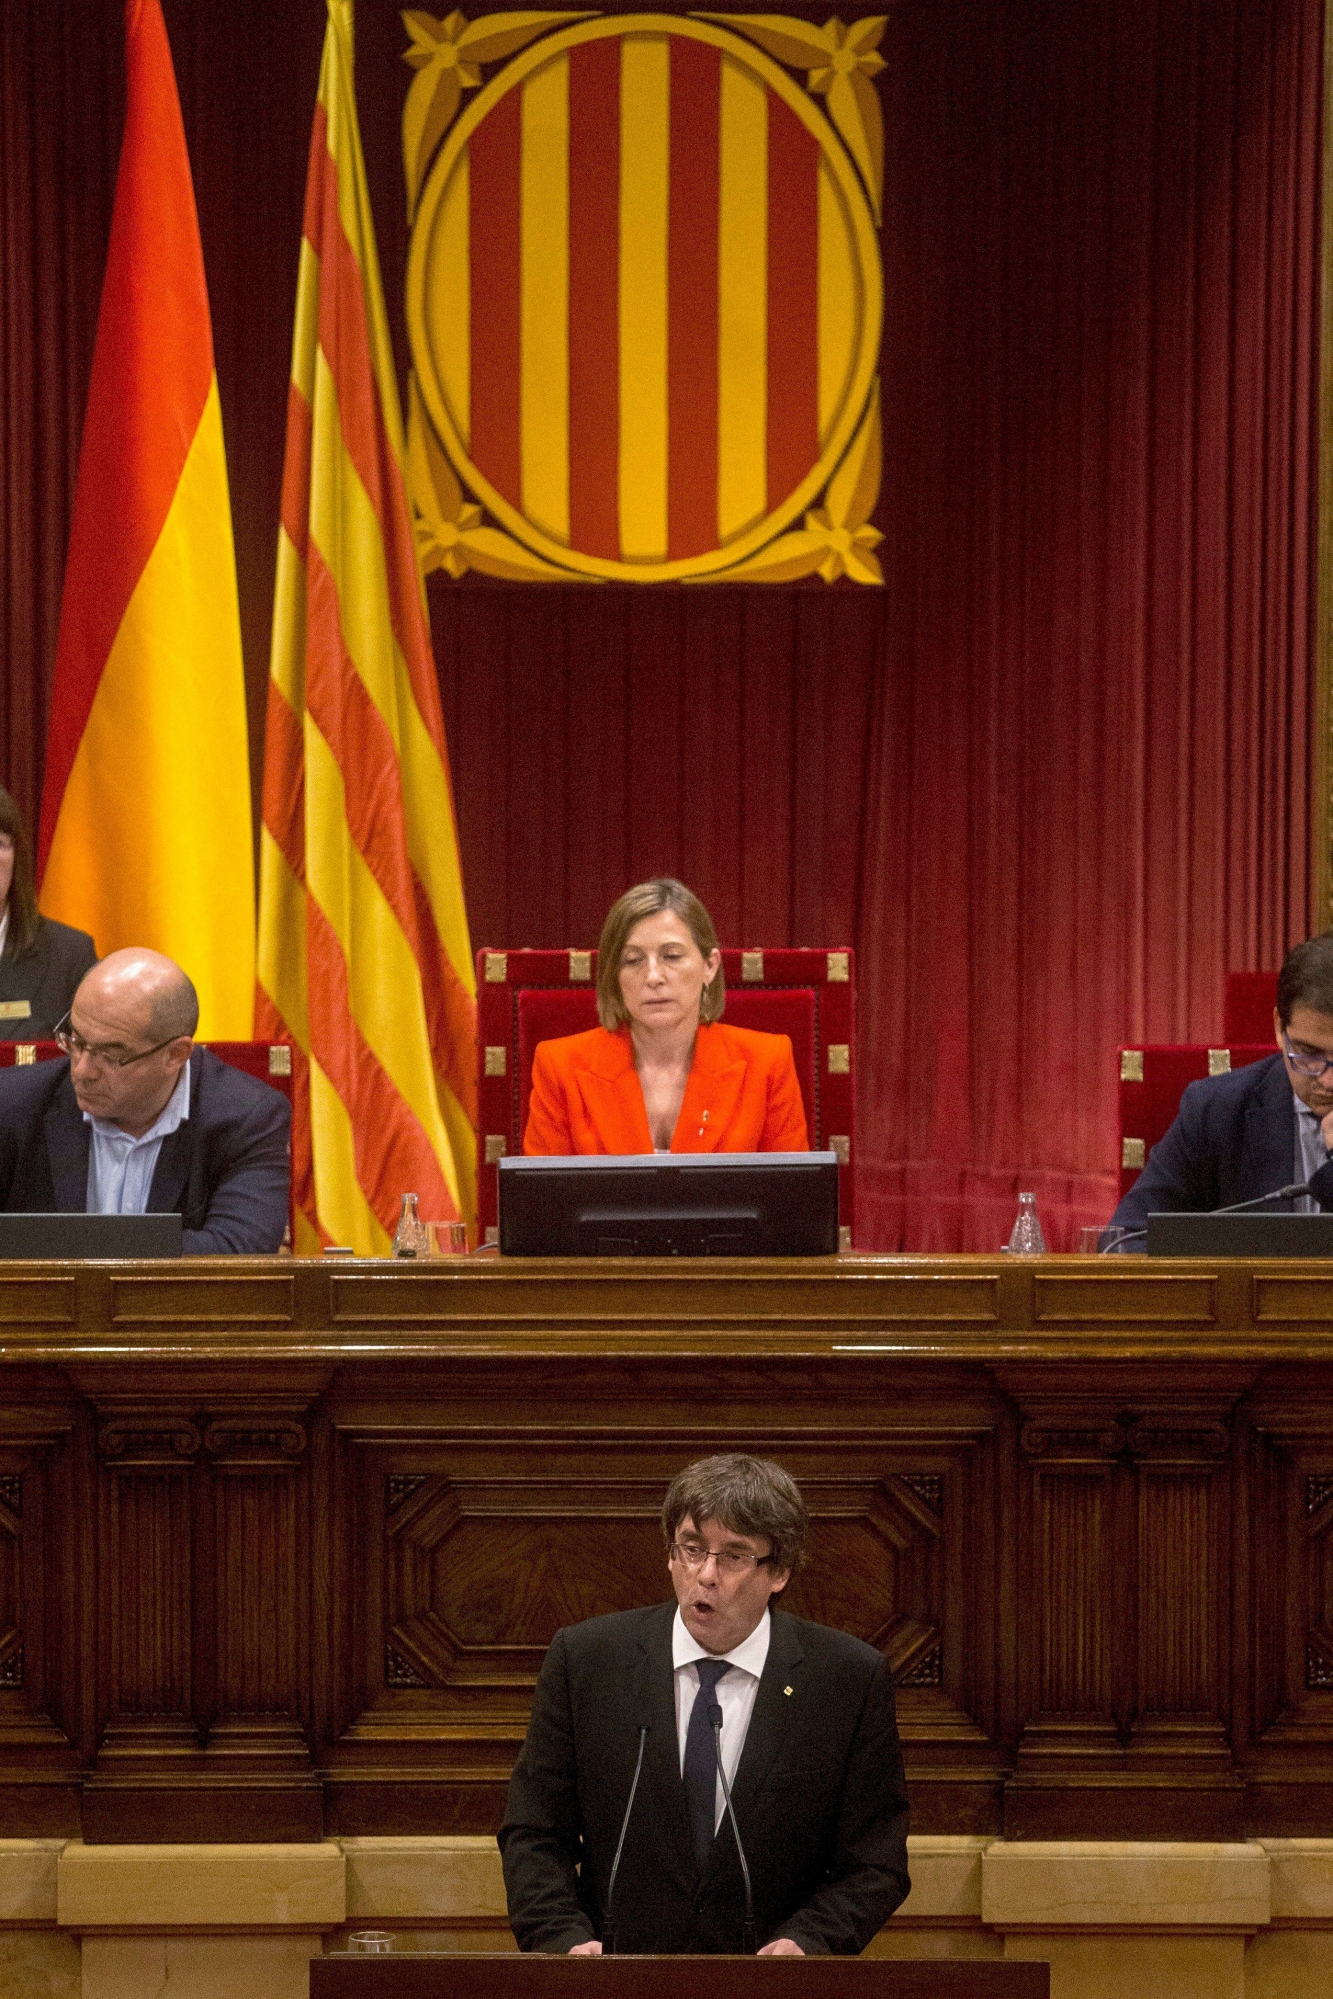 epa06257358 Catalan President Carles Puigdemont addresses the region's parliament in Barcelona, Spain, 10 October 2017. Puigdemont has proposed to suspend declaration of independence for few weeks to hold talks with Spanish government.  EPA/QUIQE GARCIA SPAIN CATALONIA